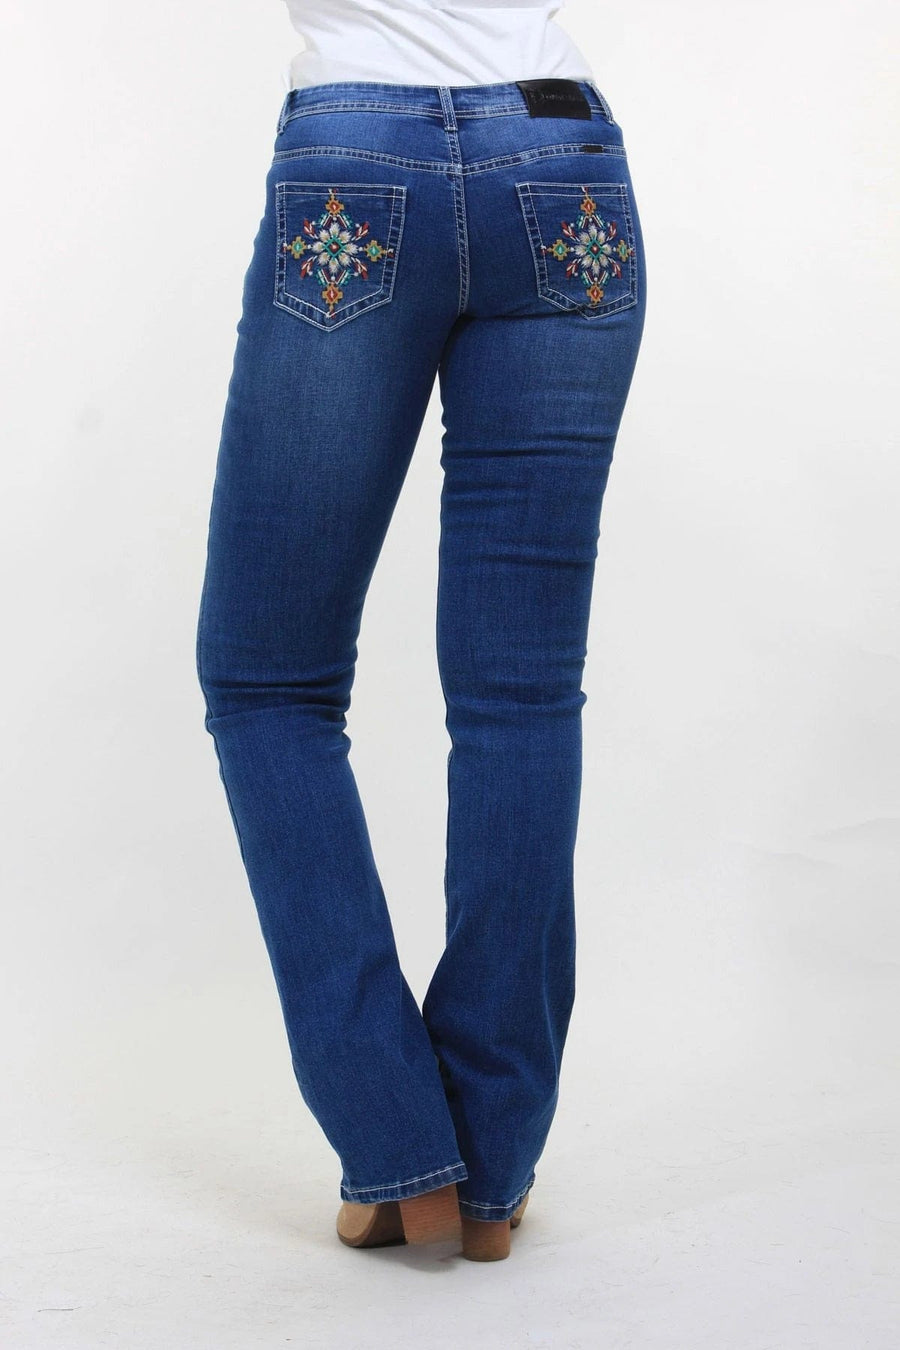 Wild Child Womens Jeans 10X34 Wild Child Jeans Womens Ryder Bling (OBW21123)